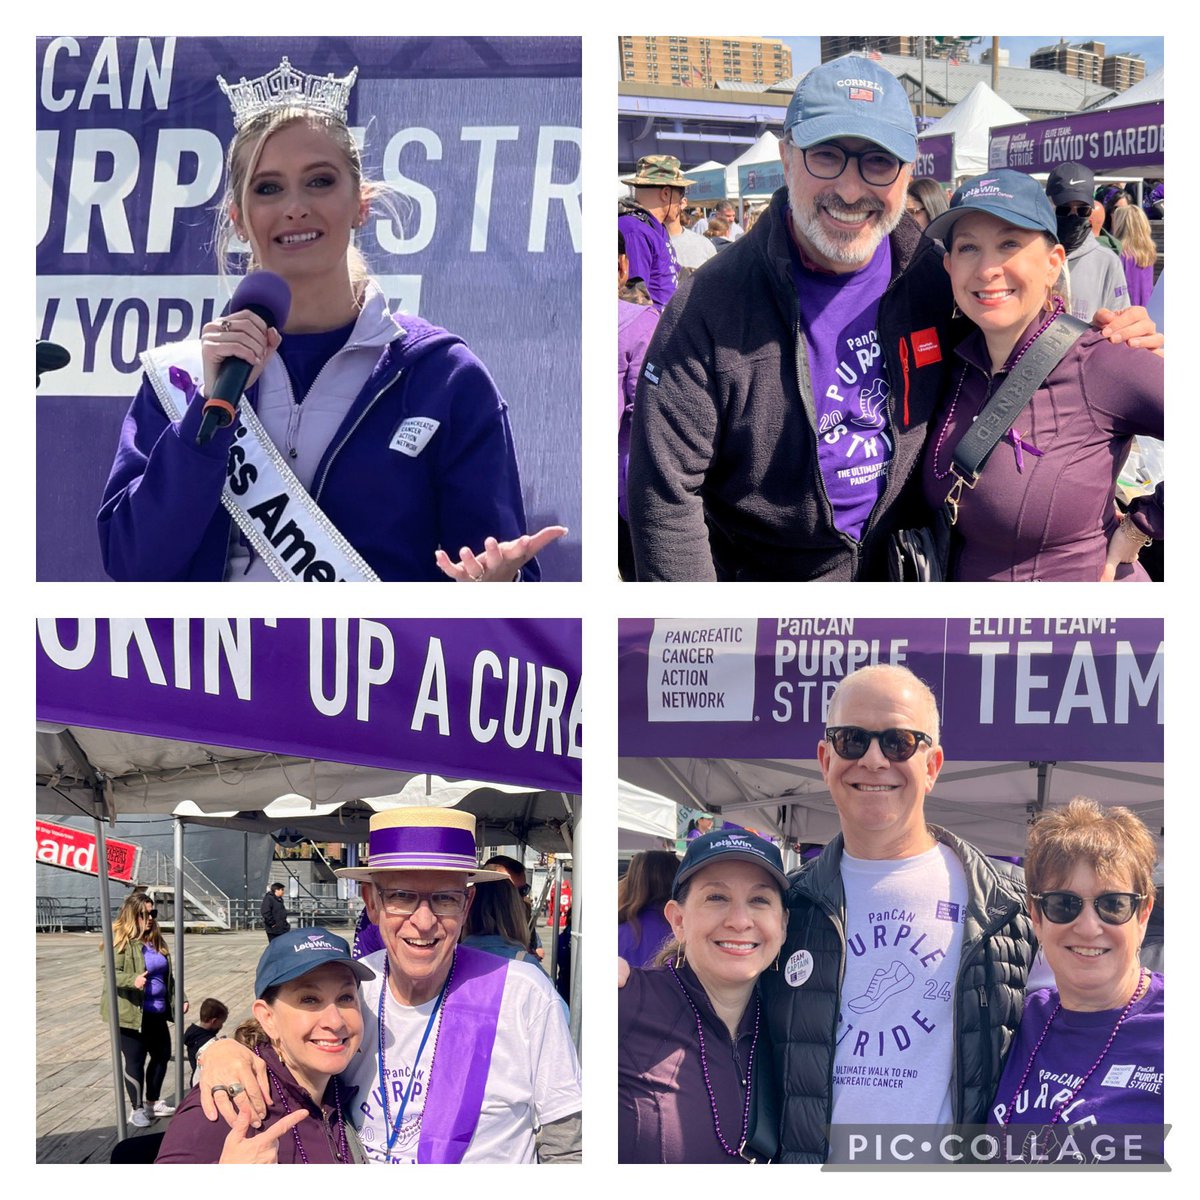 A special day in NYC supporting @PanCAN with survivors, caregivers, doctors & researchers sponsored by @nyphospital @weillcornell #endpancreaticcancer #letswintogether #pancsm